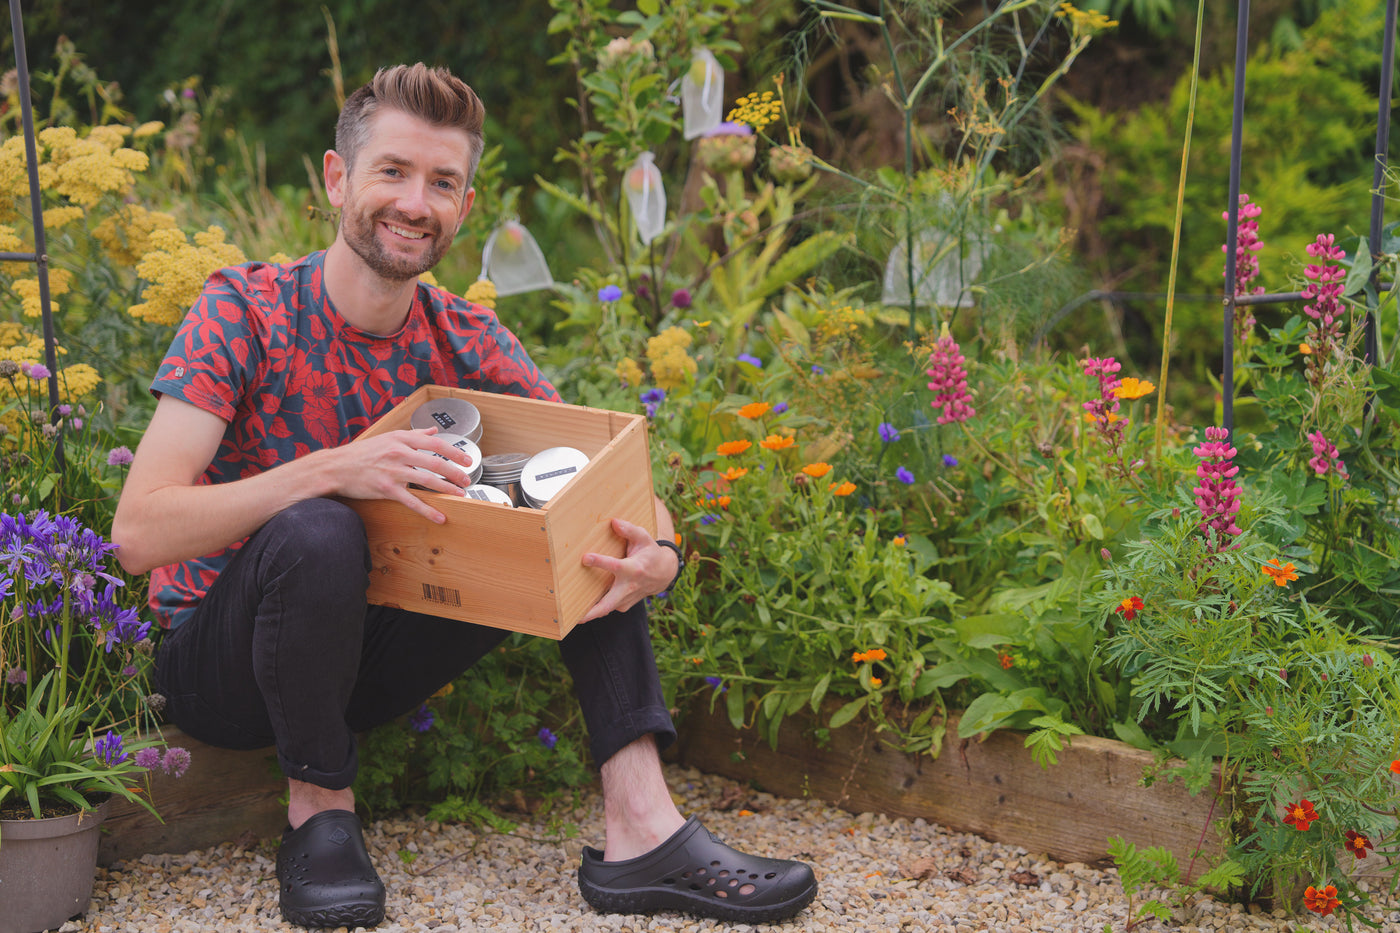 Niall sat by a flower bed holding a wooden box with metal tins containing seeds inside. Niall is wearing a pair of Muck Boots Muckster Lite Clogs in black